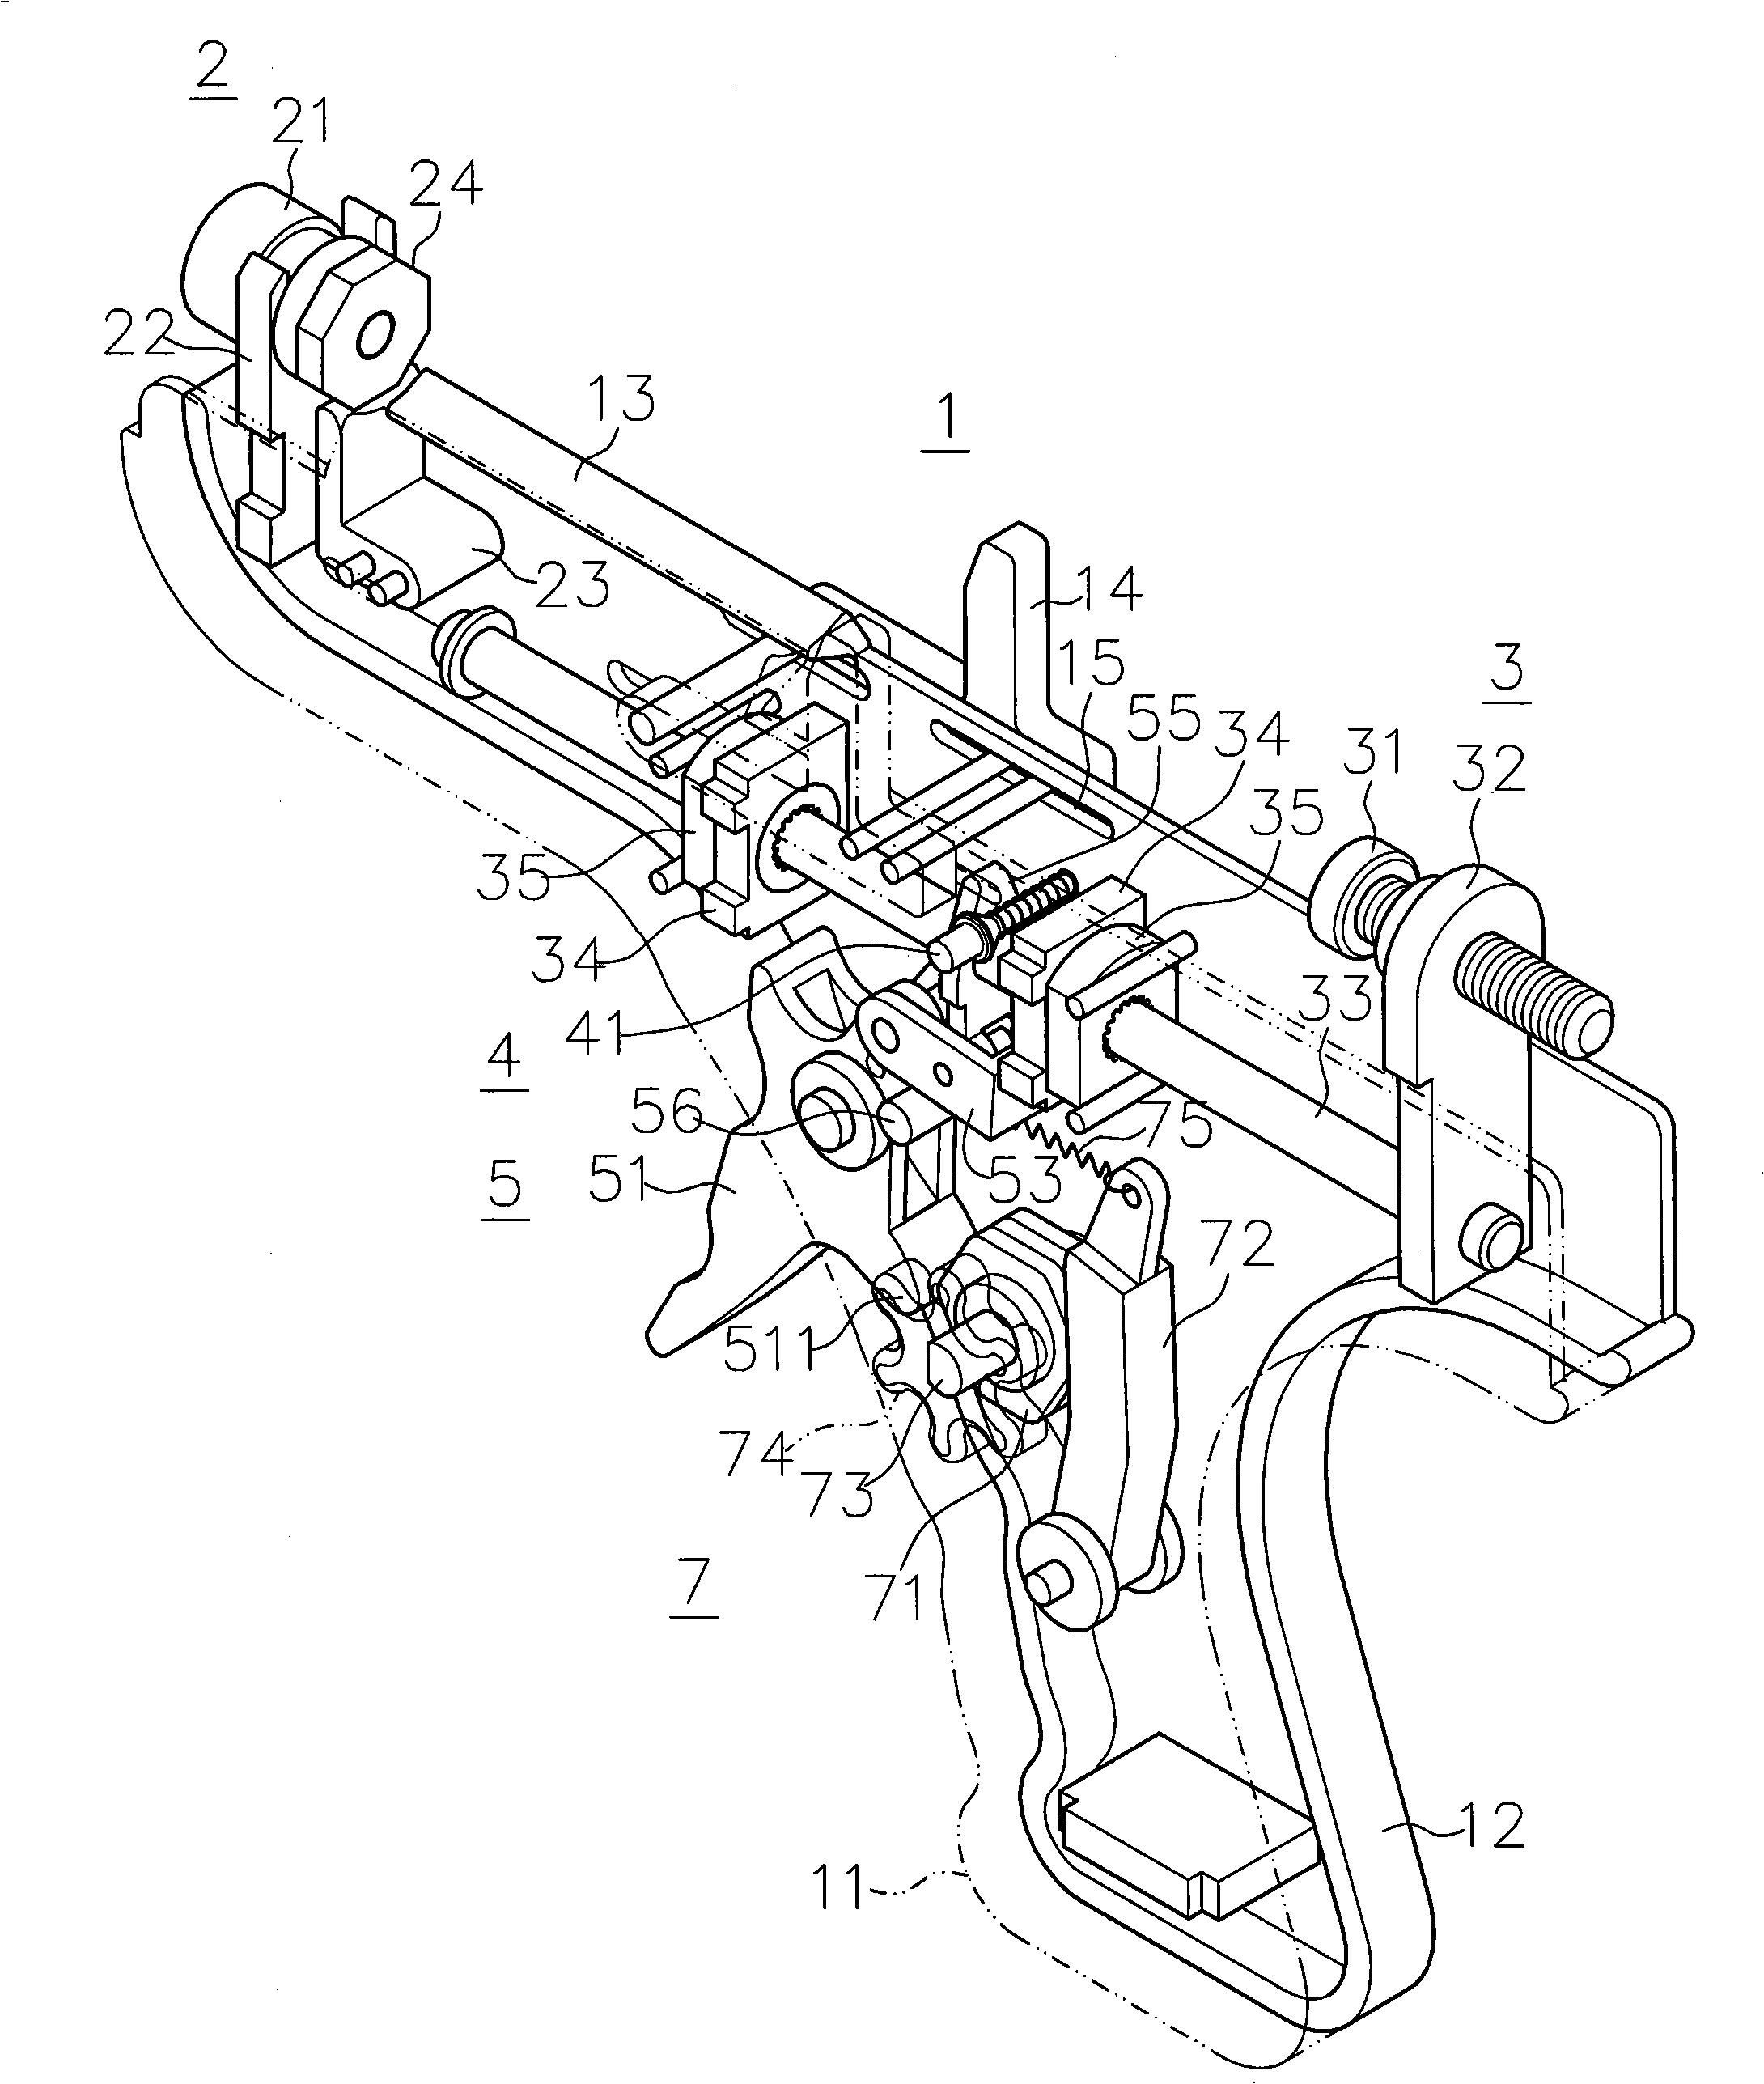 Adjustable microinjection apparatus